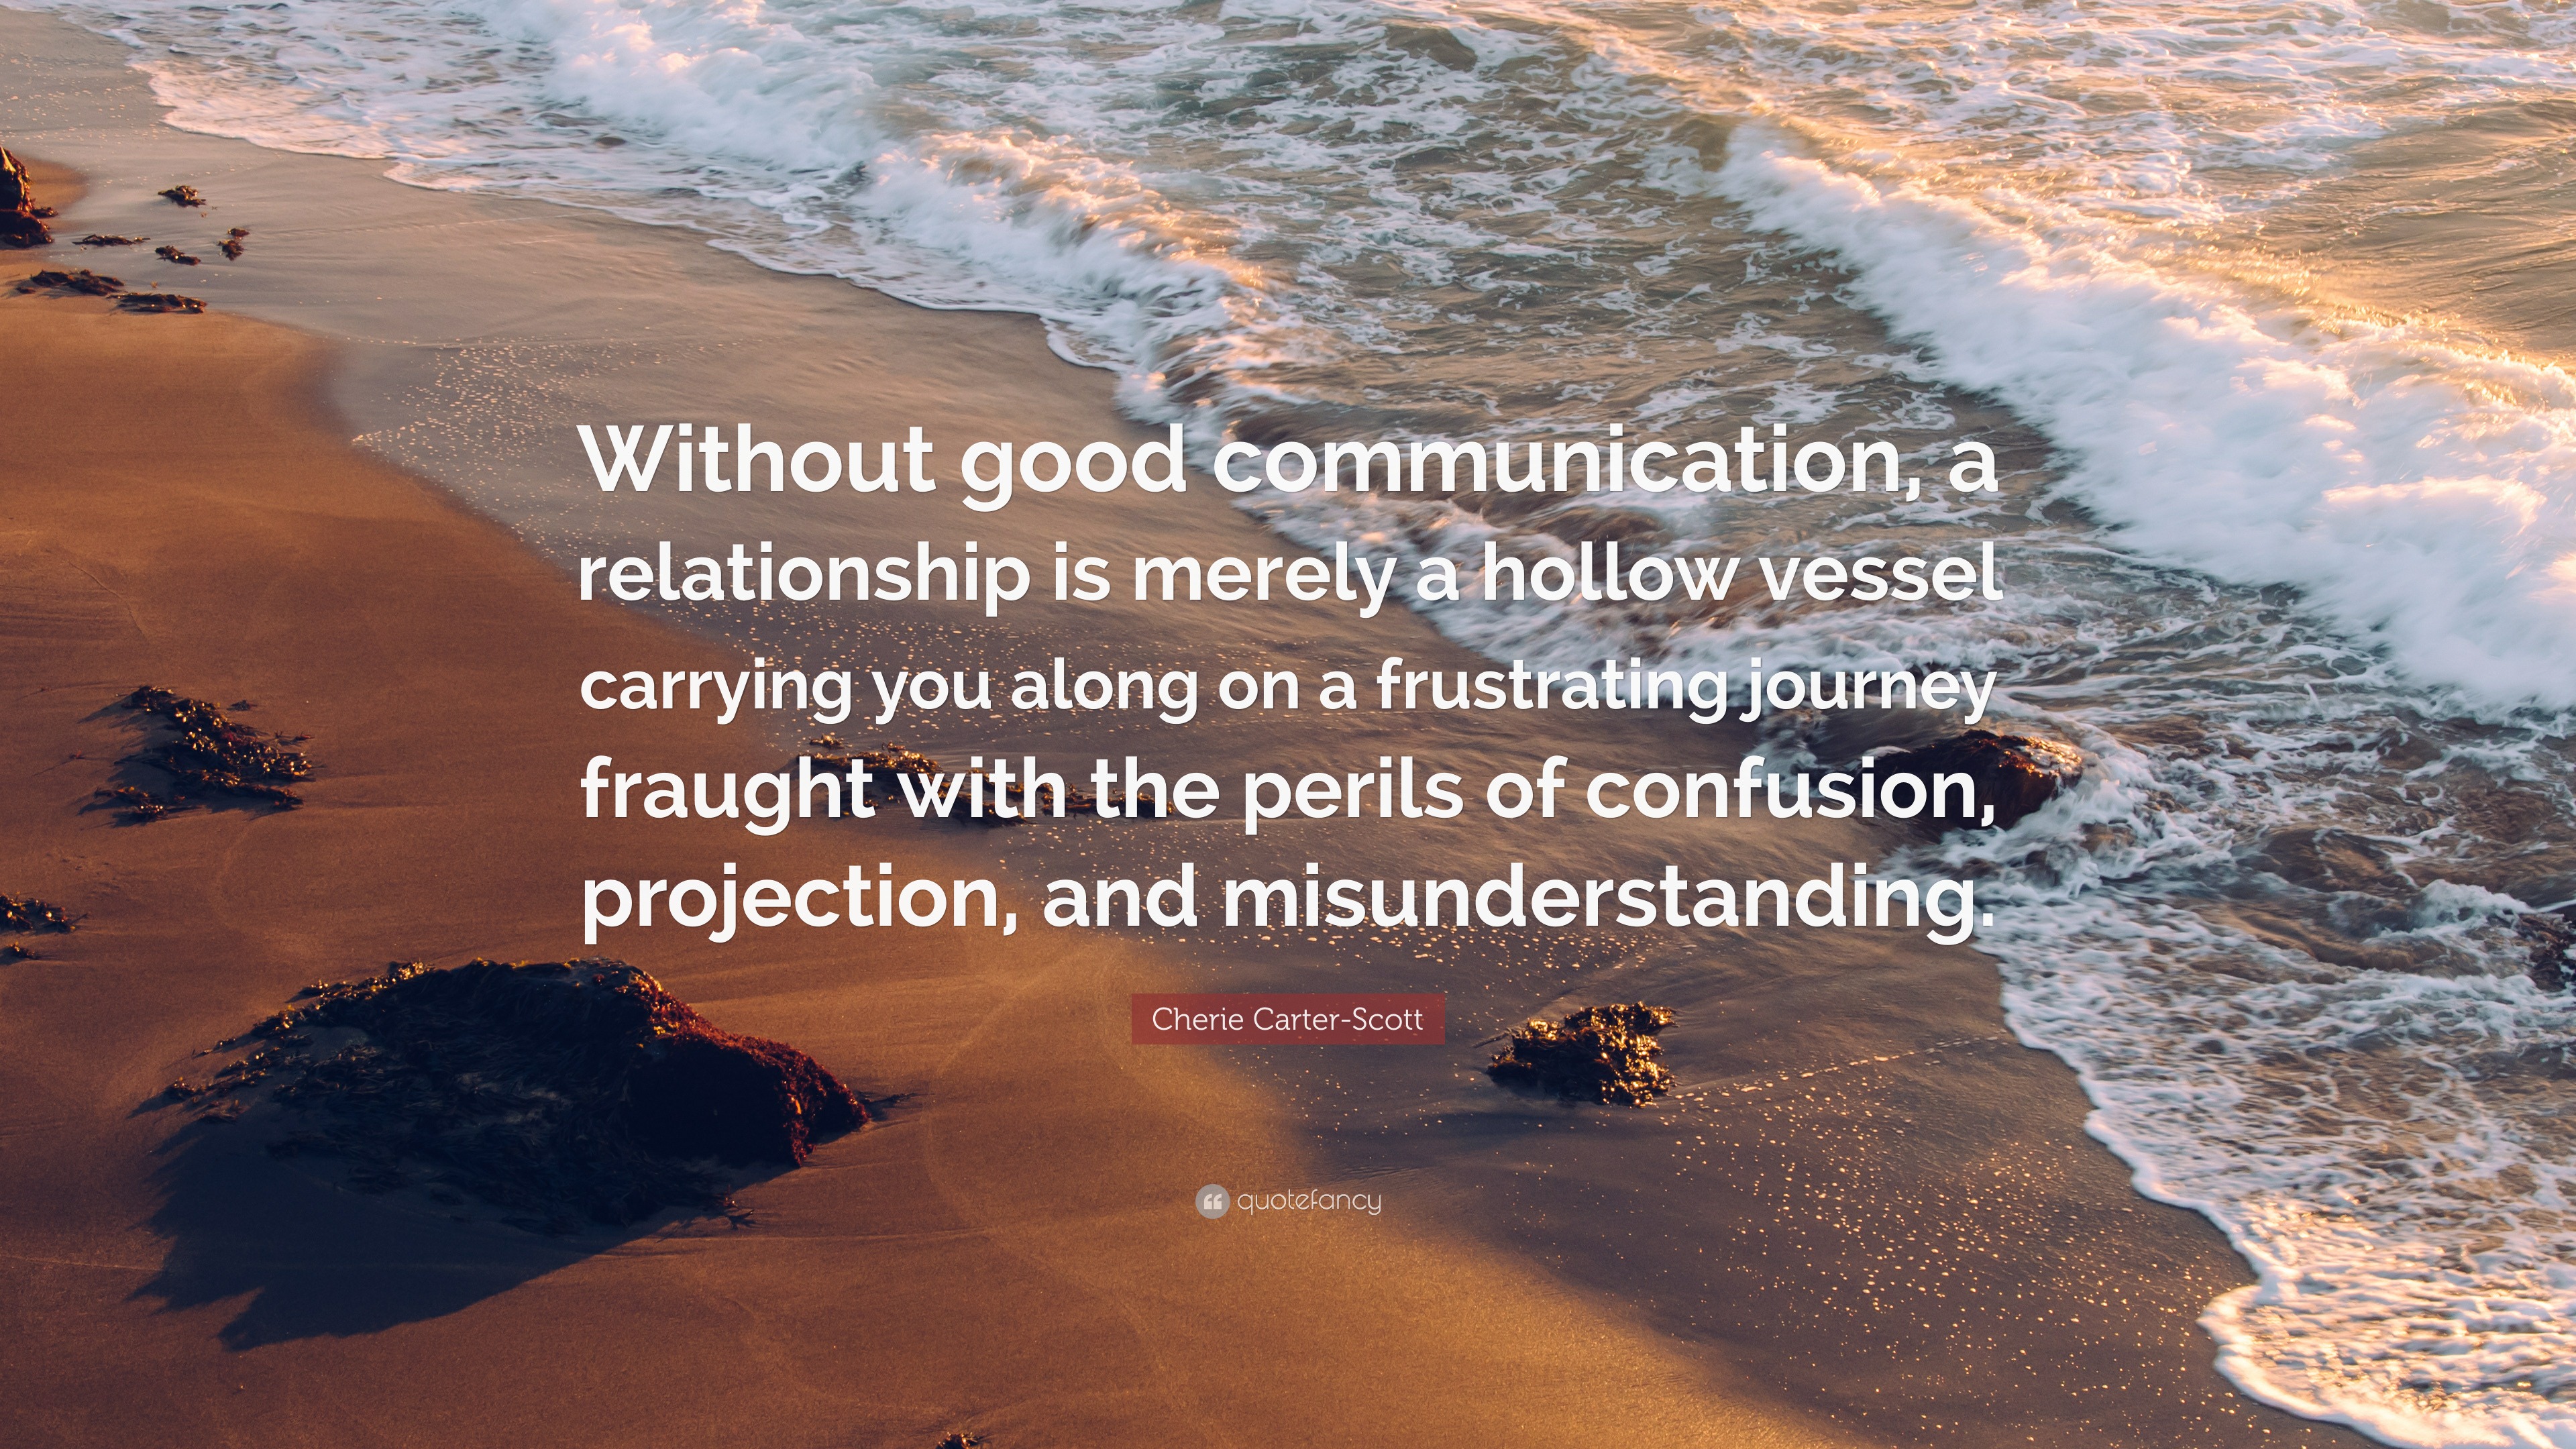 Cherie Carter-Scott Quote: “Without good communication, a